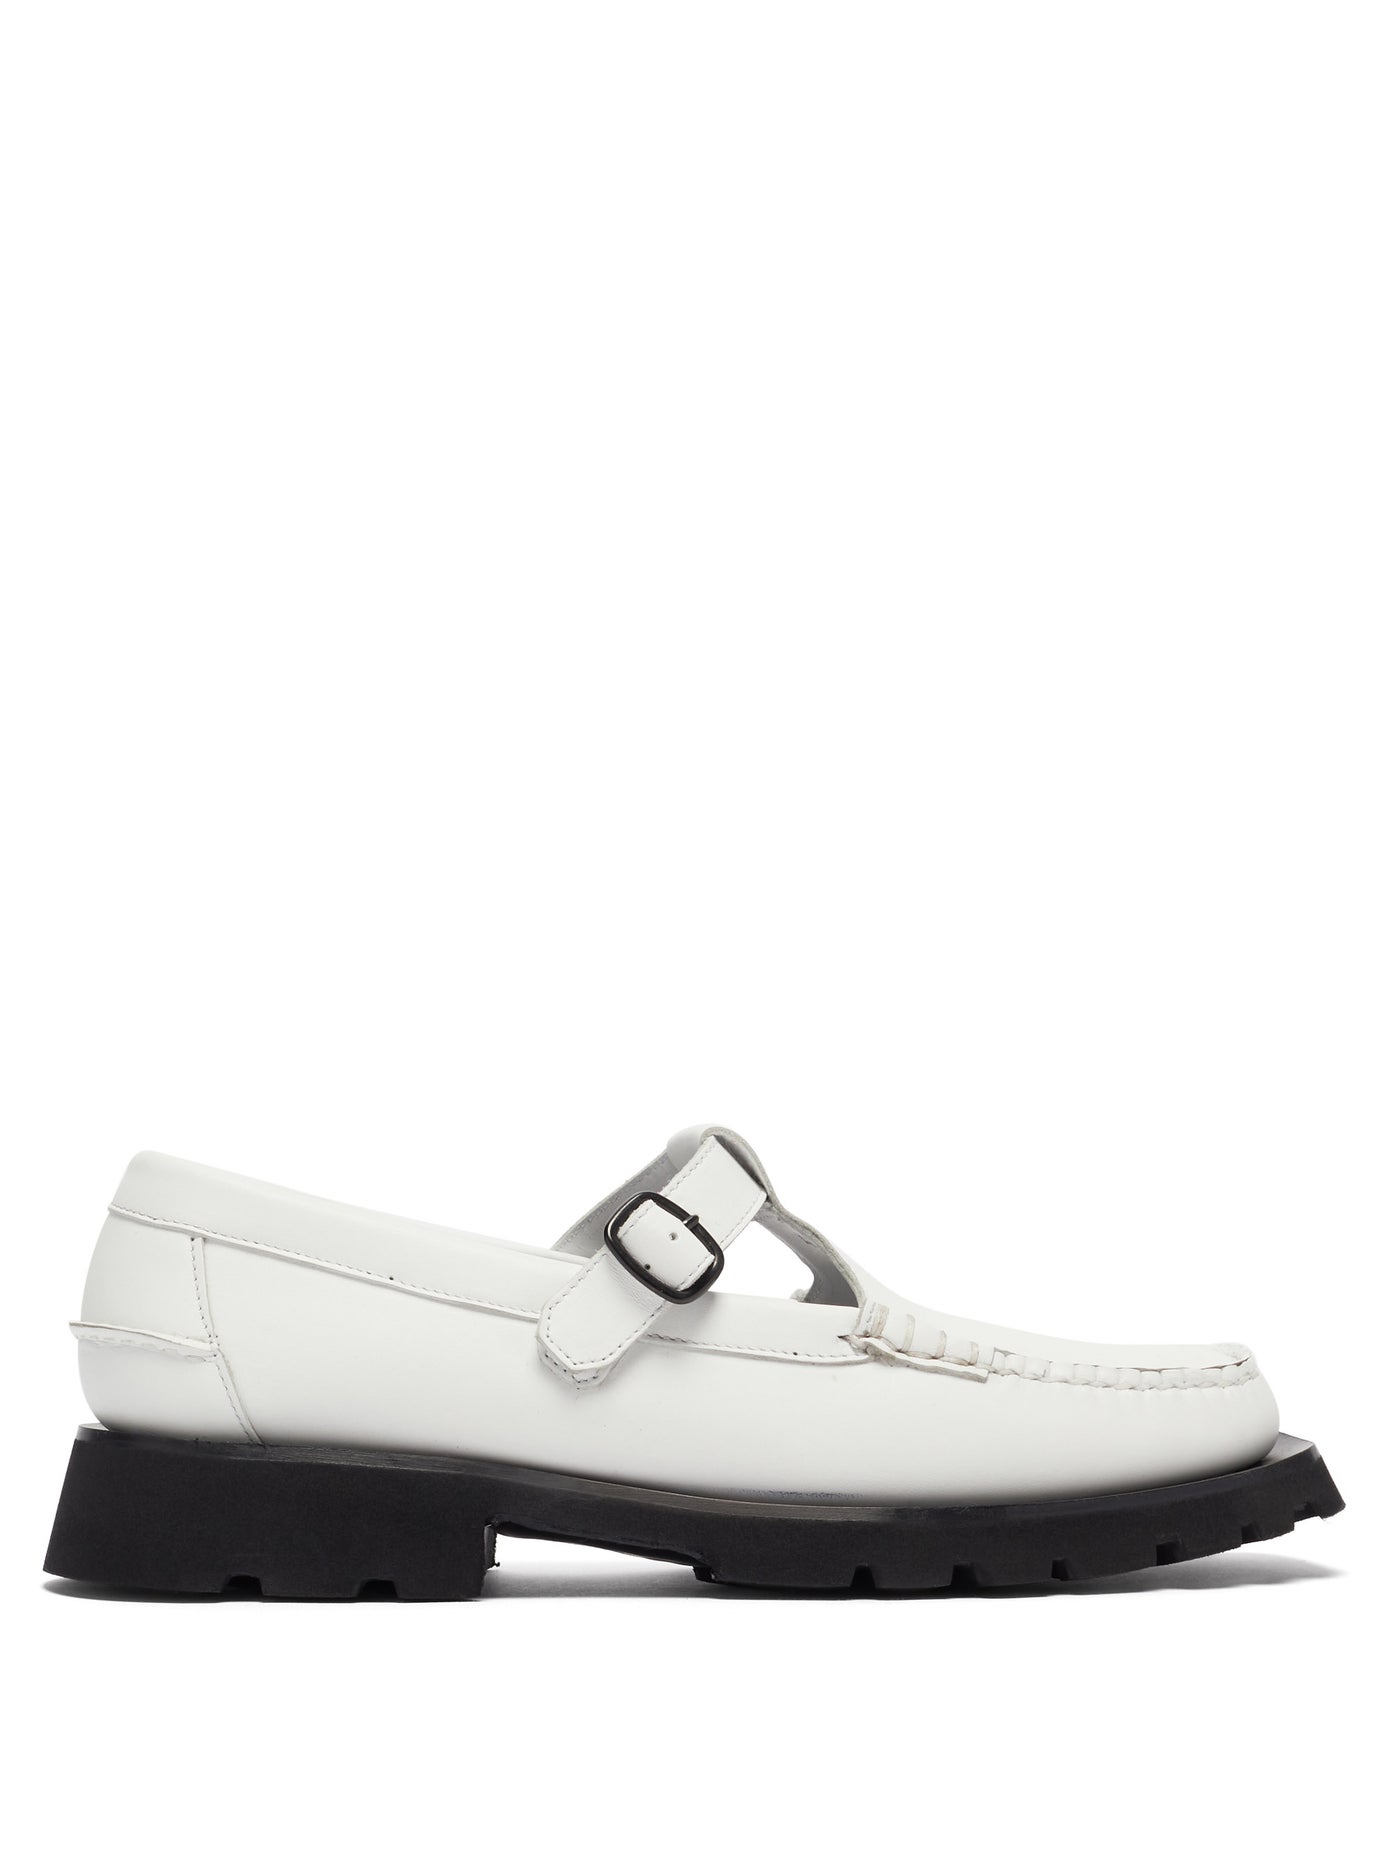 HEREU + Alber tread-sole T-bar leather loafers